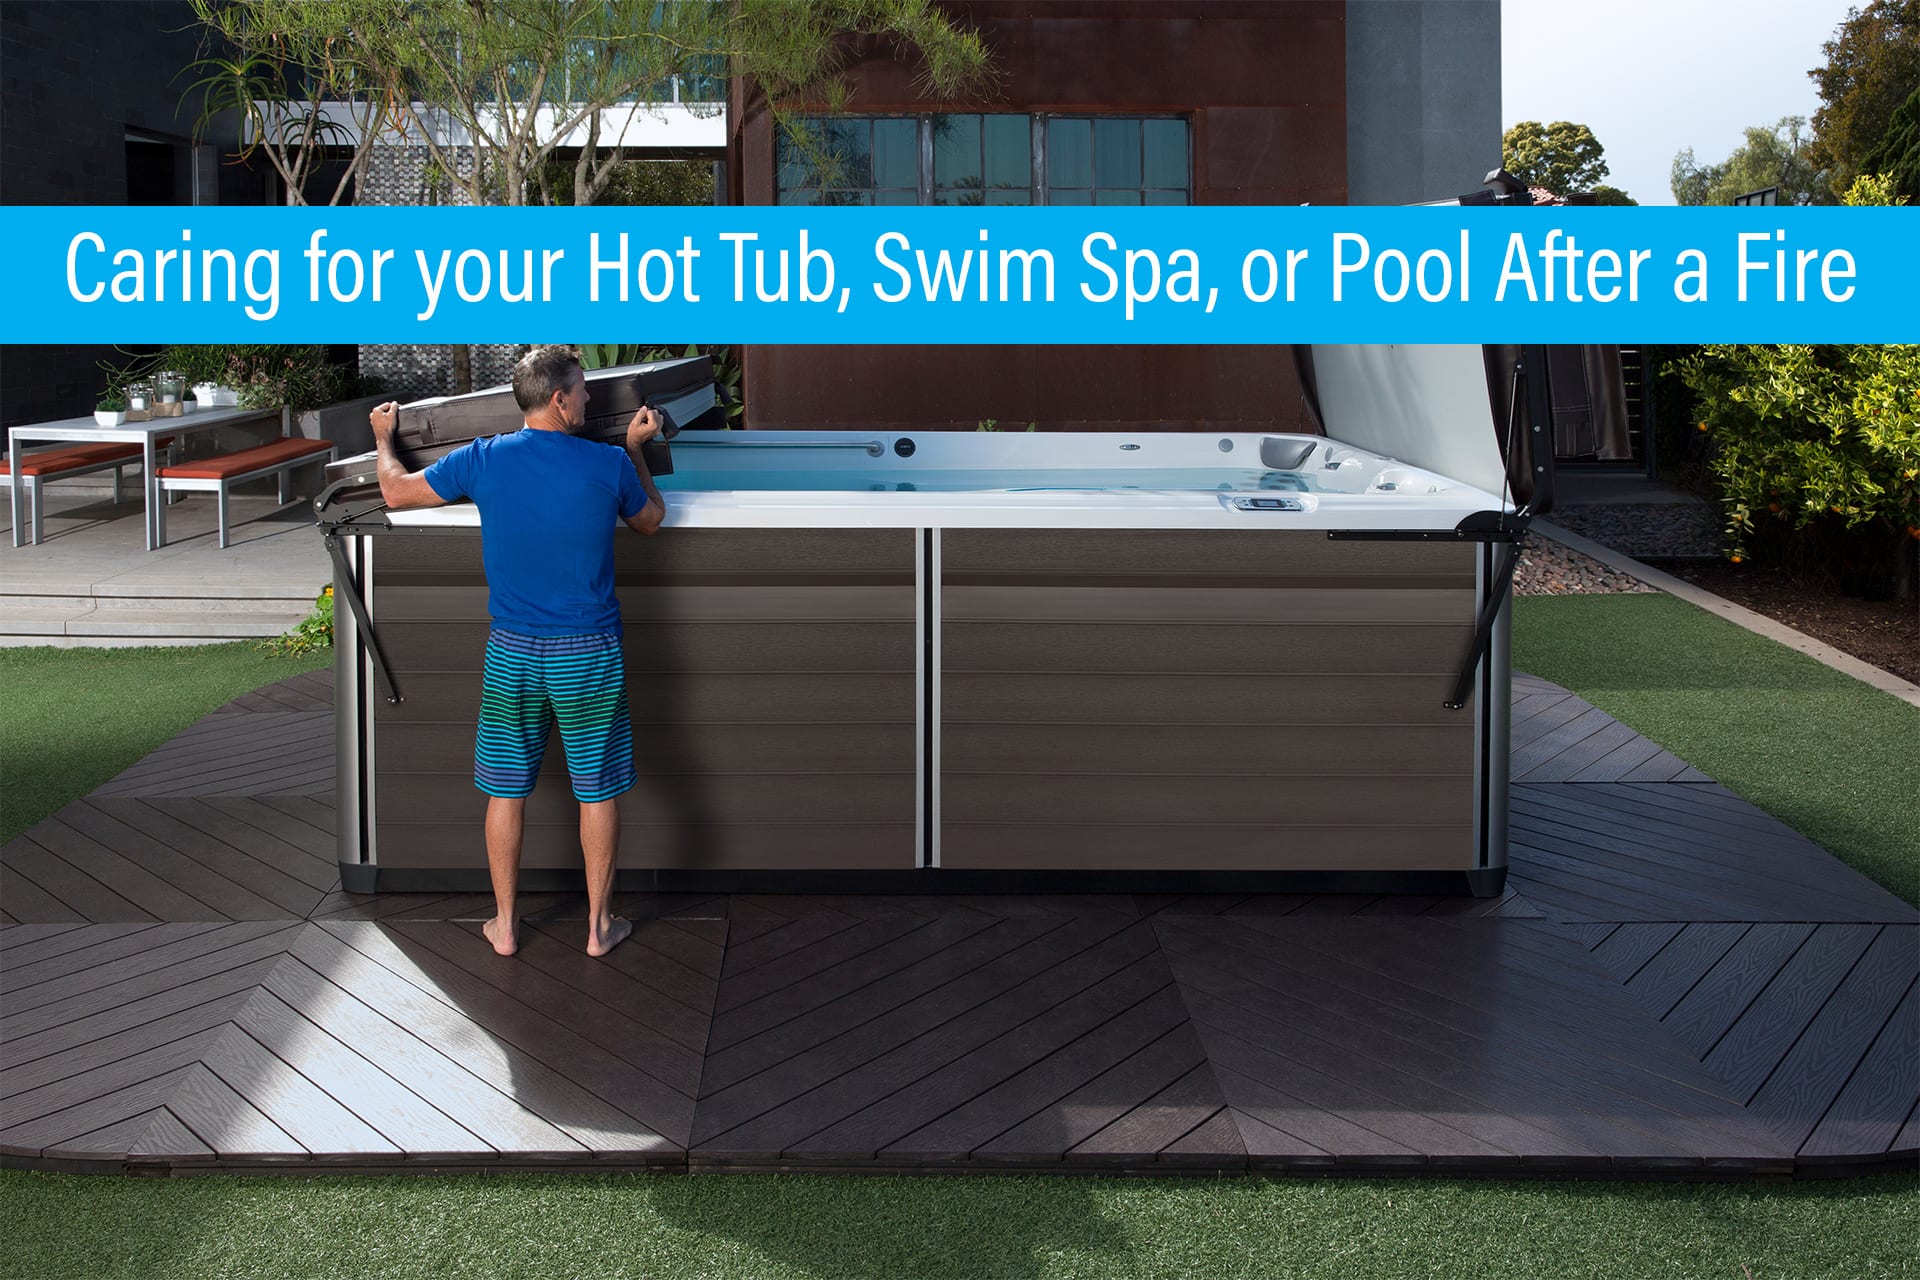 Caring For Your Hot Tub, Swim Spa, or Pool After Fires